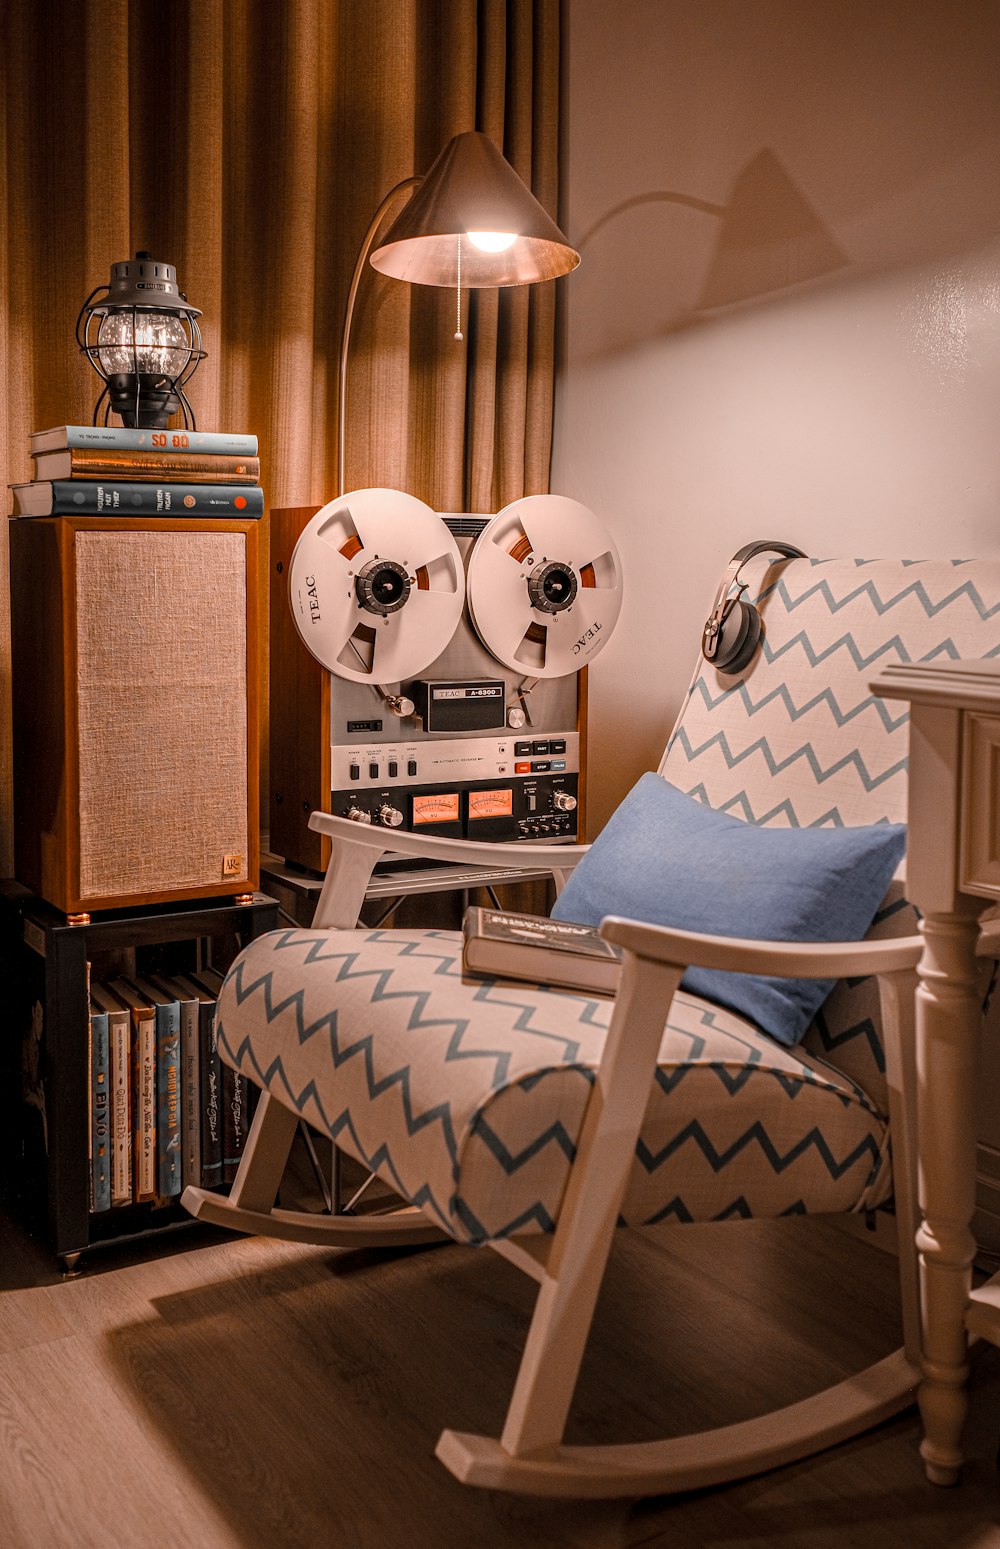 a rocking chair in a living room next to a record player